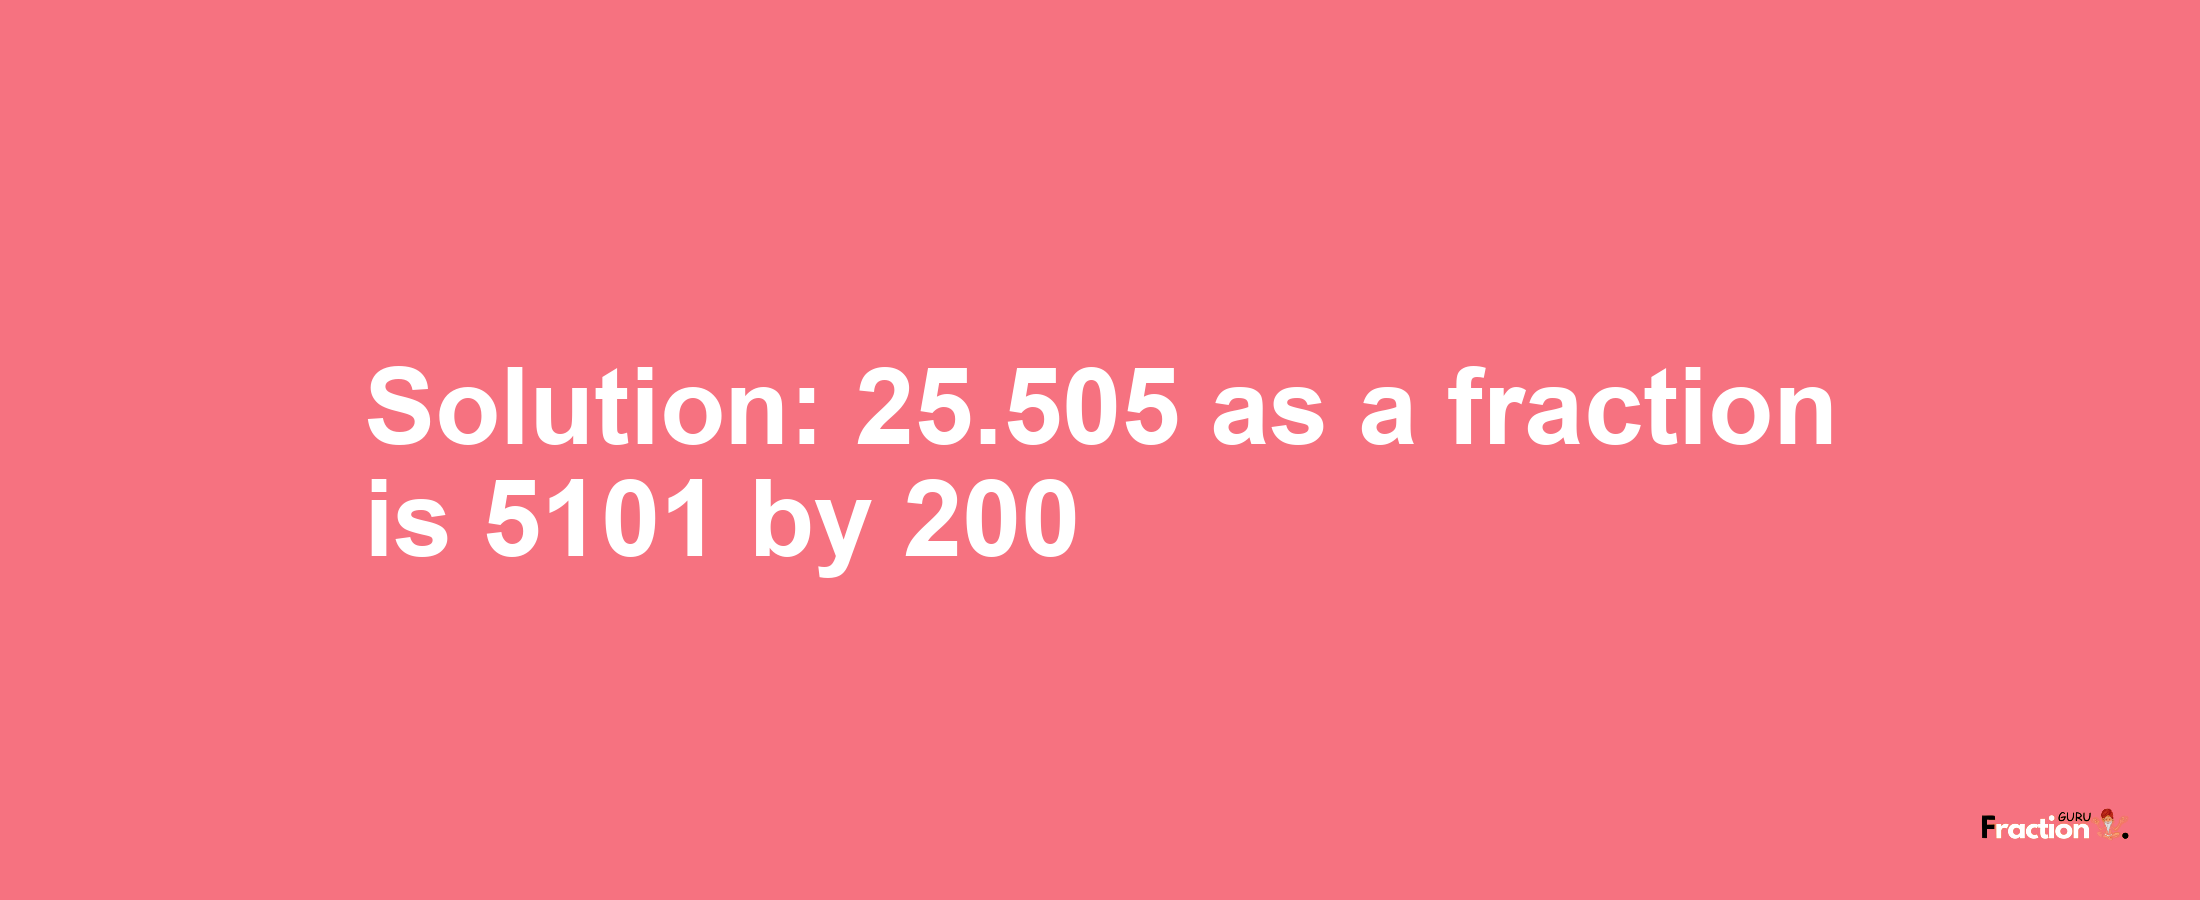 Solution:25.505 as a fraction is 5101/200